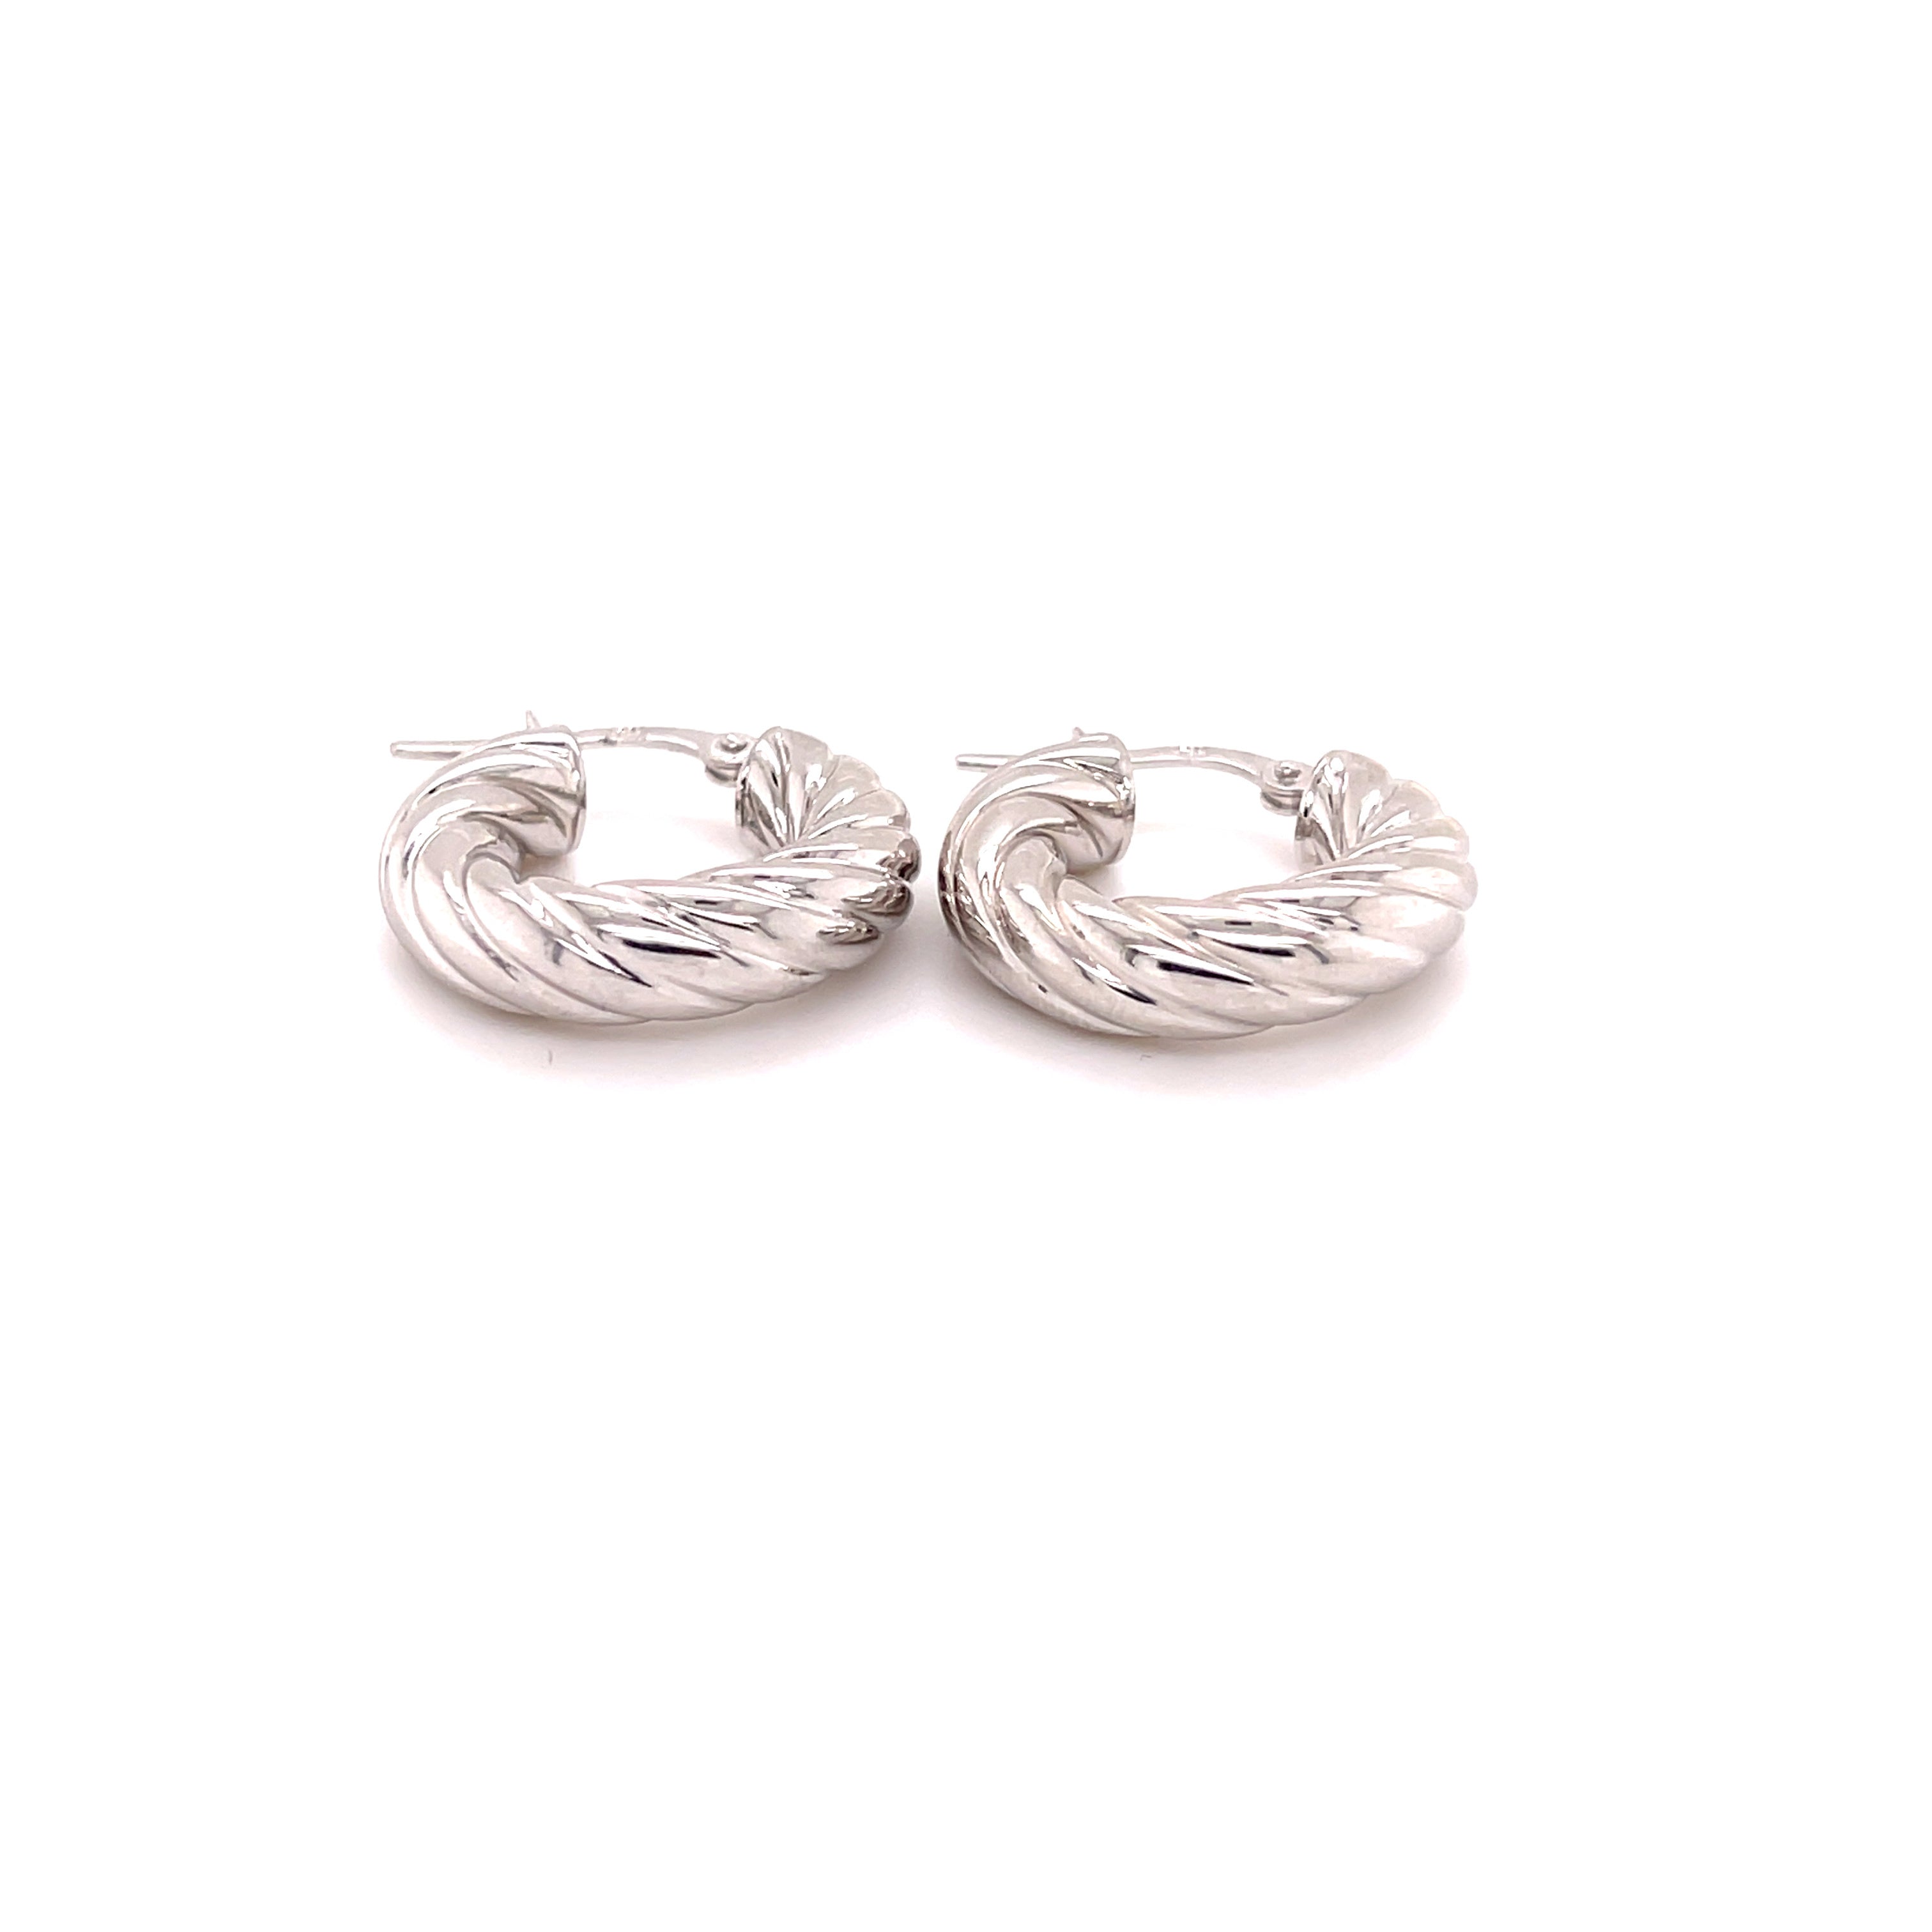 Small 14K Gold Chunky Twist Hoops